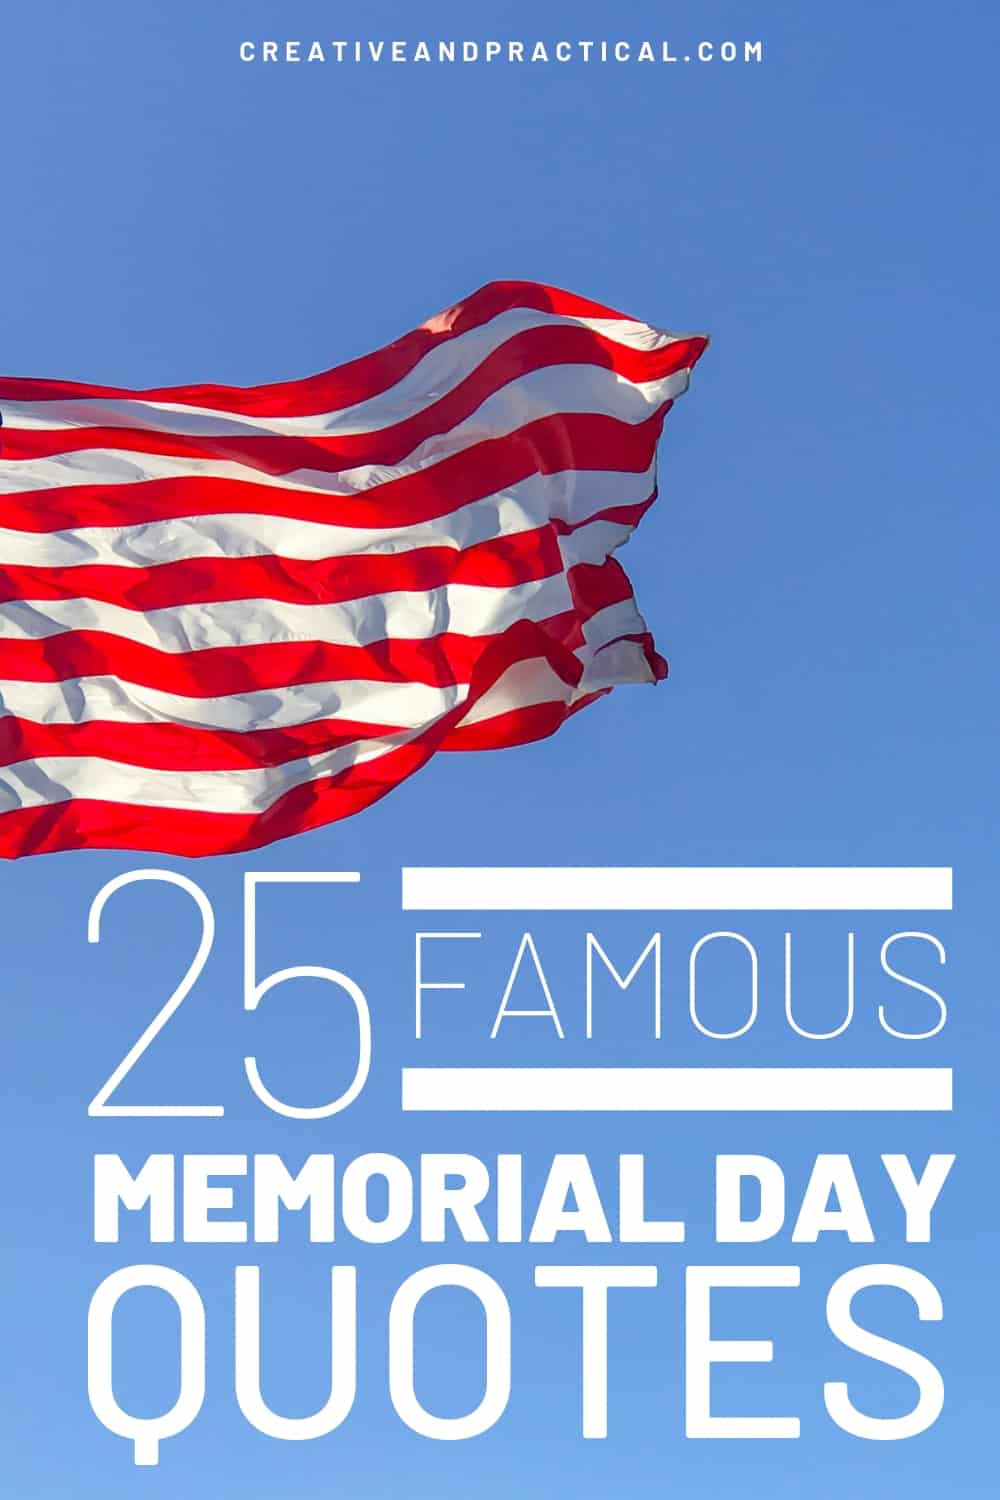 Short Memorial Day Quotes
 25 Inspirational Memorial Day Quotes 2019